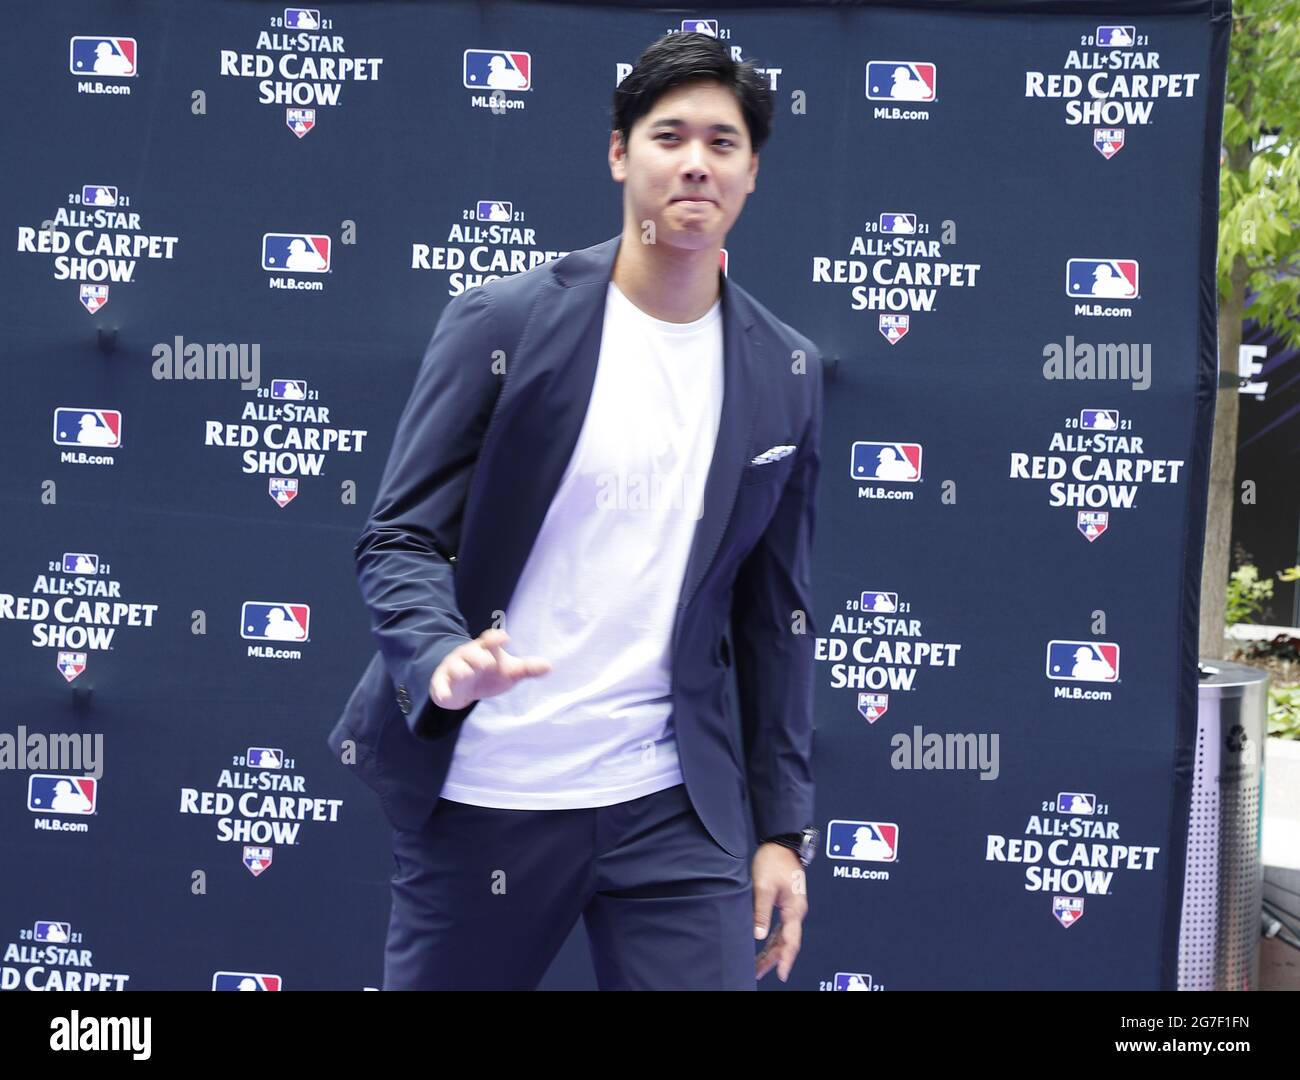 Denver, United States. 13th July, 2021. Los Angeles Angels Shohei Ohtani  poses during the MLB All-Star Red Carpet Show at Coors Field in Denver,  Colorado, on Tuesday, July 13, 2021. Photo by